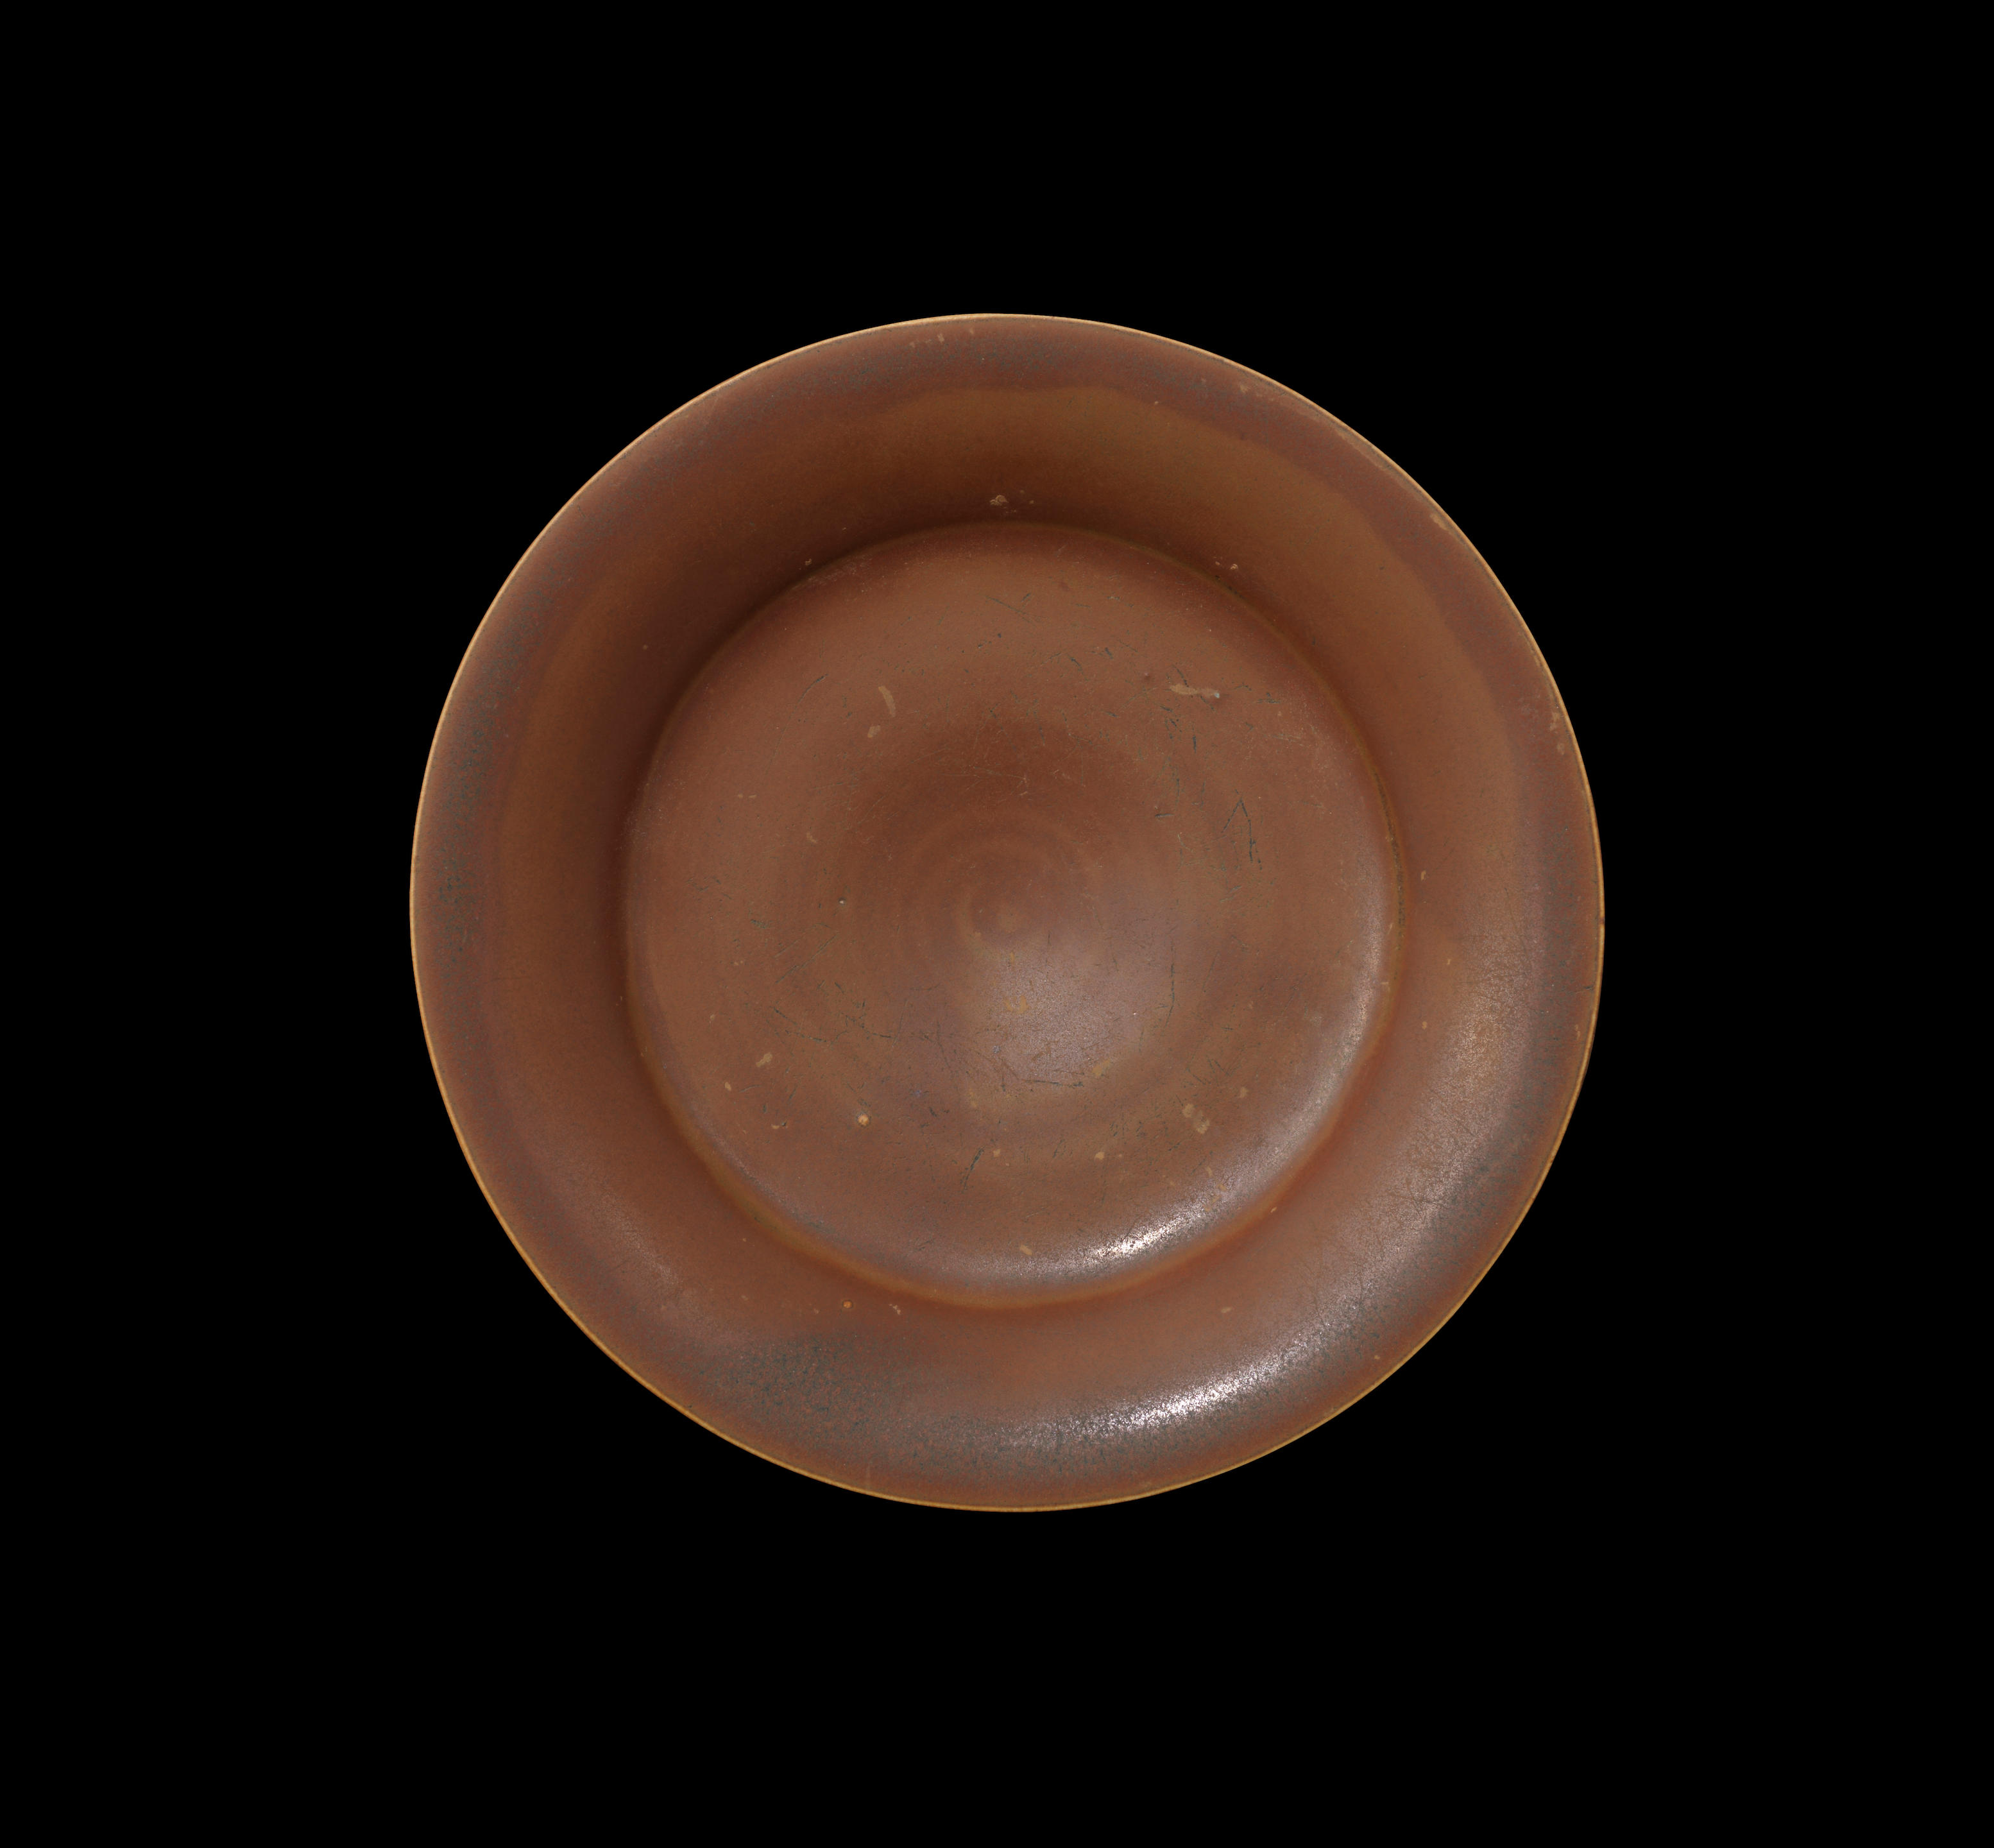 A superb and rare Ding persimmon-glazed conical bowl, Northern